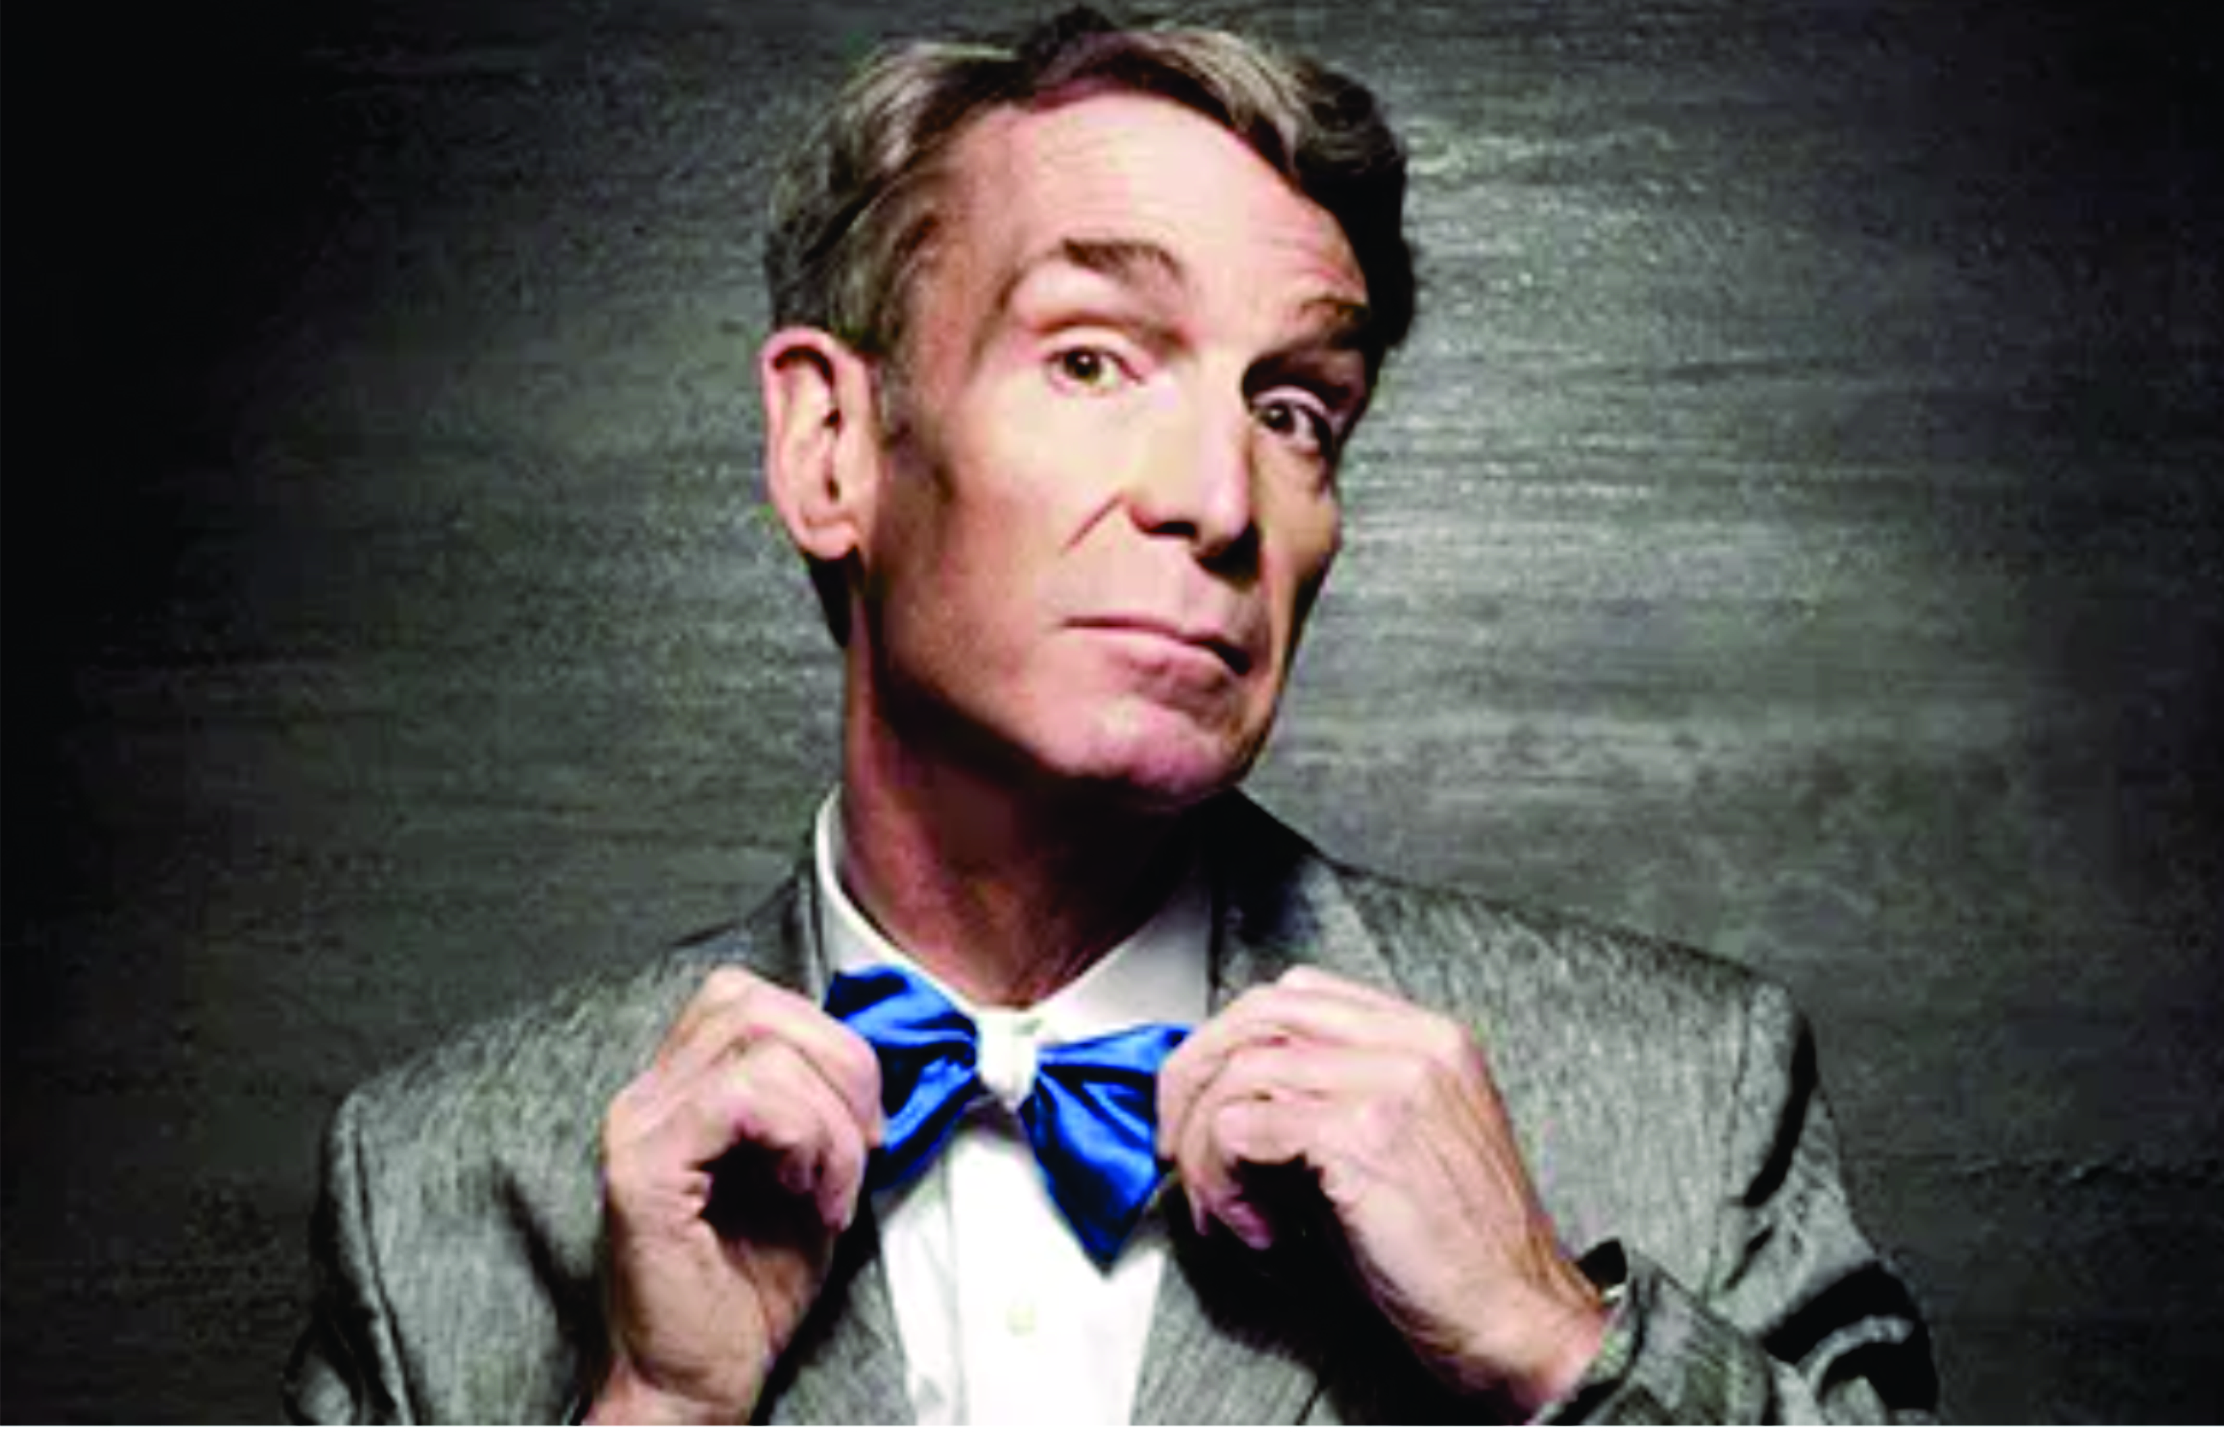 Was Bill Nye's death wish for climate realists a veiled call to violence?